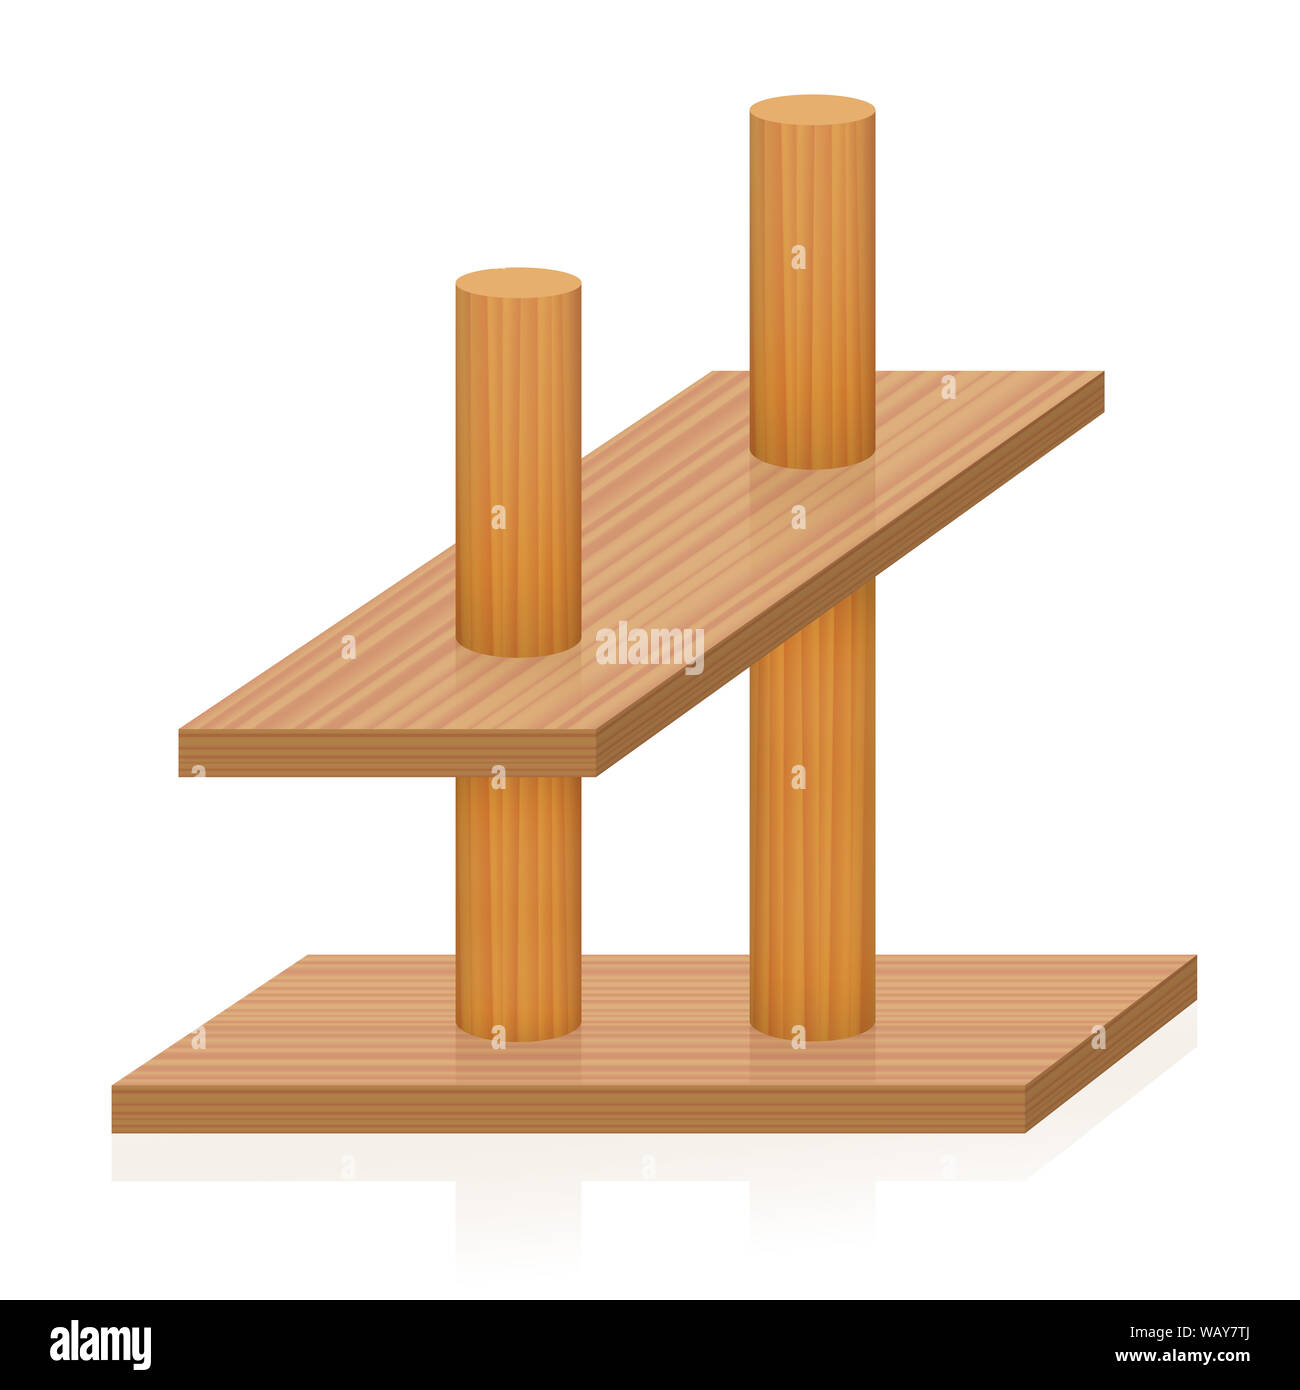 Impossible object. Two sticks pierce two planks, which are oriented differently in the perspective. Paradox, conflicting, incompatible, false . Stock Photo